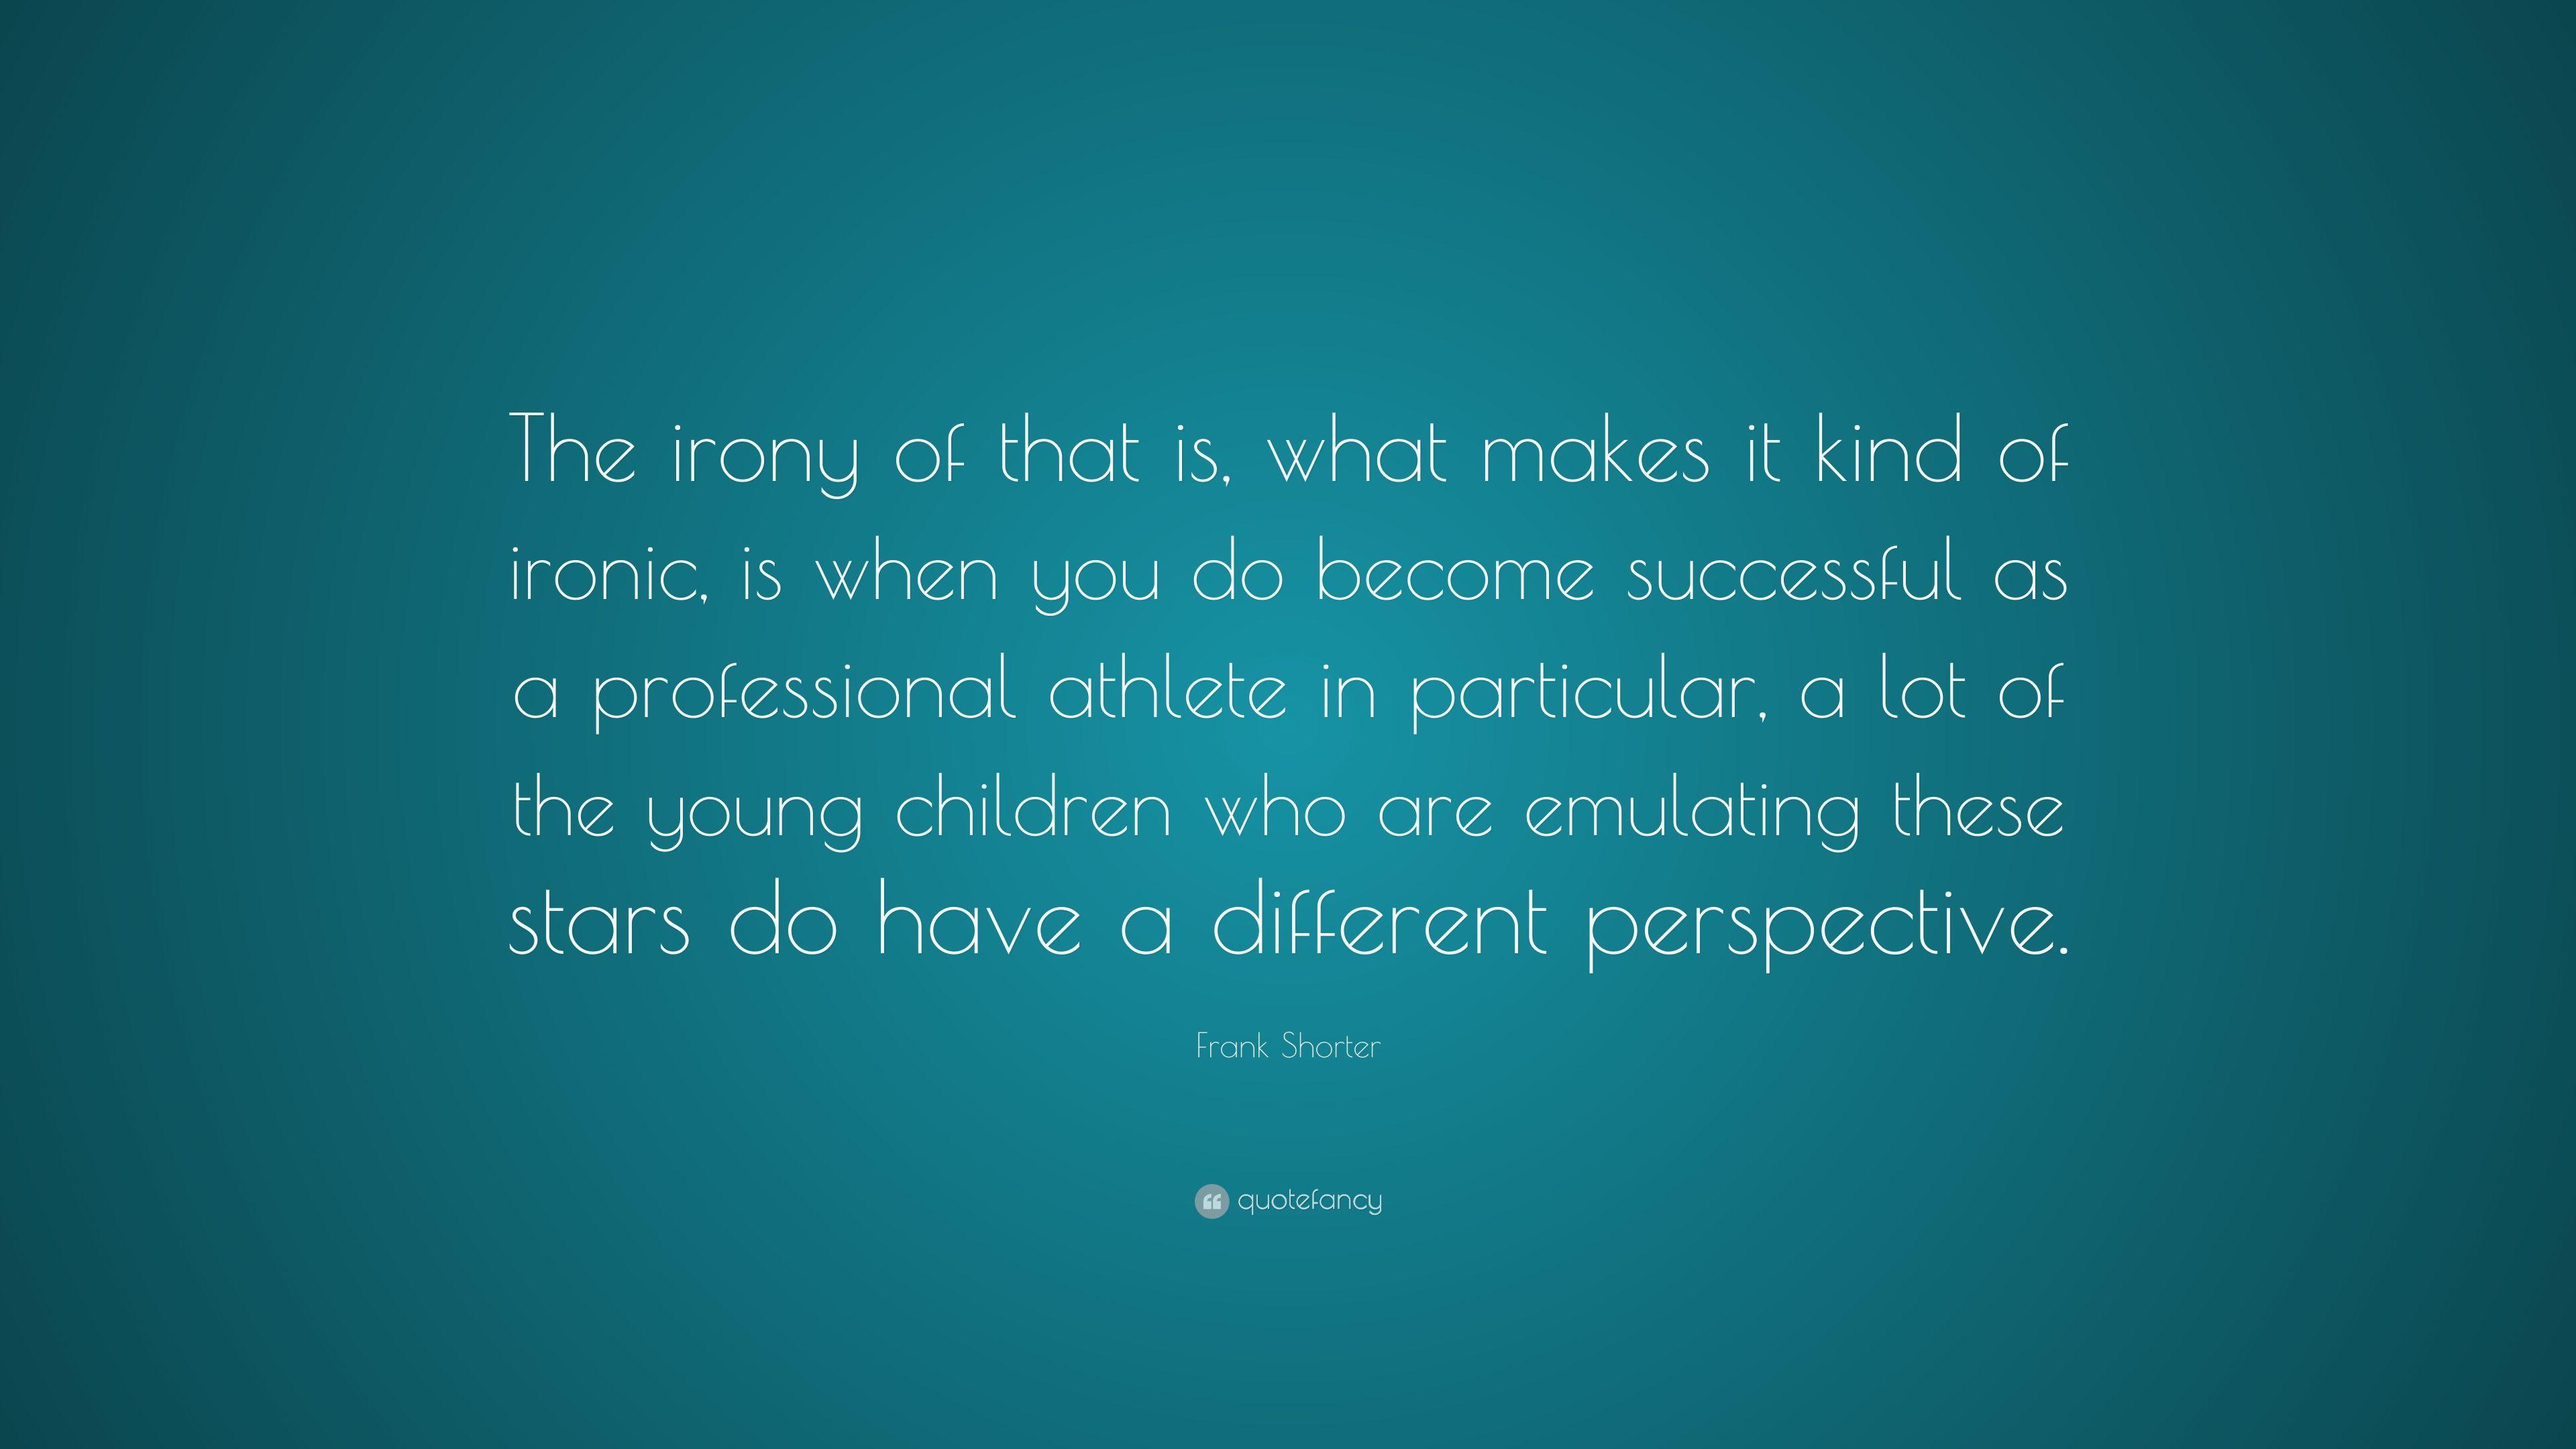 Frank Shorter Quote: “The irony of that is, what makes it kind